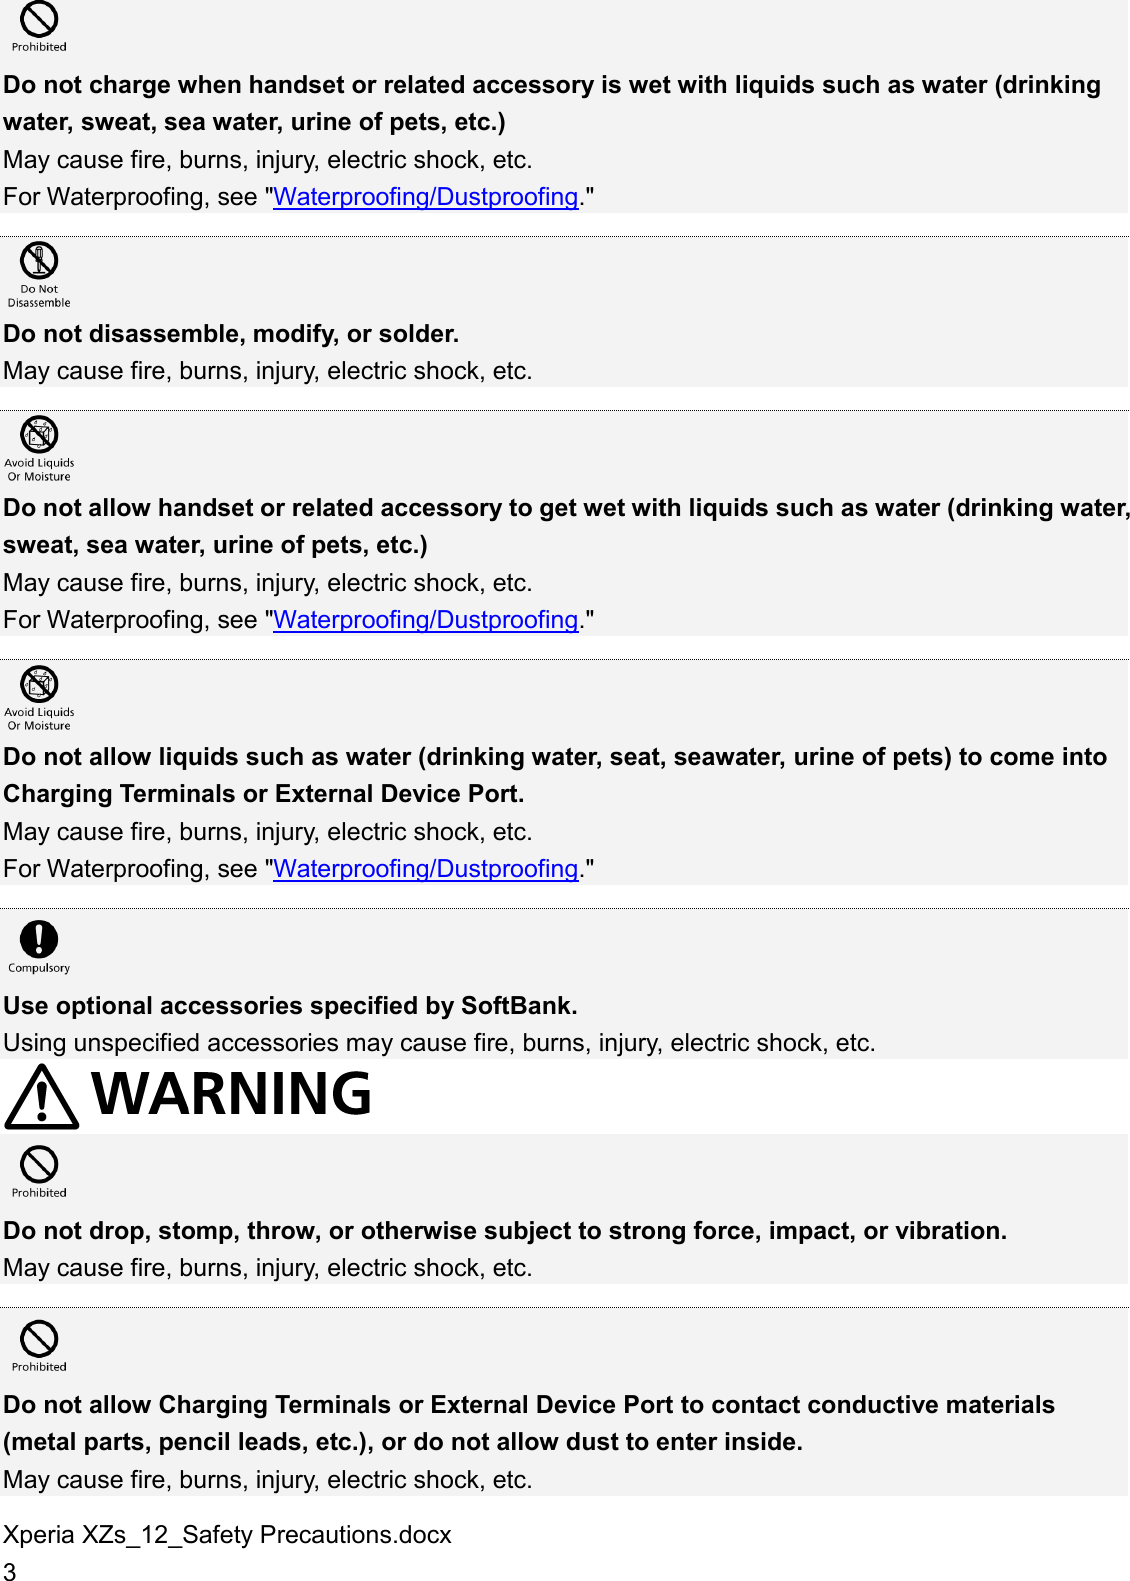 Xperia XZs_12_Safety Precautions.docx 3  Do not charge when handset or related accessory is wet with liquids such as water (drinking water, sweat, sea water, urine of pets, etc.) May cause fire, burns, injury, electric shock, etc. For Waterproofing, see &quot;Waterproofing/Dustproofing.&quot;   Do not disassemble, modify, or solder. May cause fire, burns, injury, electric shock, etc.   Do not allow handset or related accessory to get wet with liquids such as water (drinking water, sweat, sea water, urine of pets, etc.) May cause fire, burns, injury, electric shock, etc. For Waterproofing, see &quot;Waterproofing/Dustproofing.&quot;   Do not allow liquids such as water (drinking water, seat, seawater, urine of pets) to come into Charging Terminals or External Device Port. May cause fire, burns, injury, electric shock, etc. For Waterproofing, see &quot;Waterproofing/Dustproofing.&quot;   Use optional accessories specified by SoftBank. Using unspecified accessories may cause fire, burns, injury, electric shock, etc.   Do not drop, stomp, throw, or otherwise subject to strong force, impact, or vibration. May cause fire, burns, injury, electric shock, etc.   Do not allow Charging Terminals or External Device Port to contact conductive materials (metal parts, pencil leads, etc.), or do not allow dust to enter inside. May cause fire, burns, injury, electric shock, etc. 